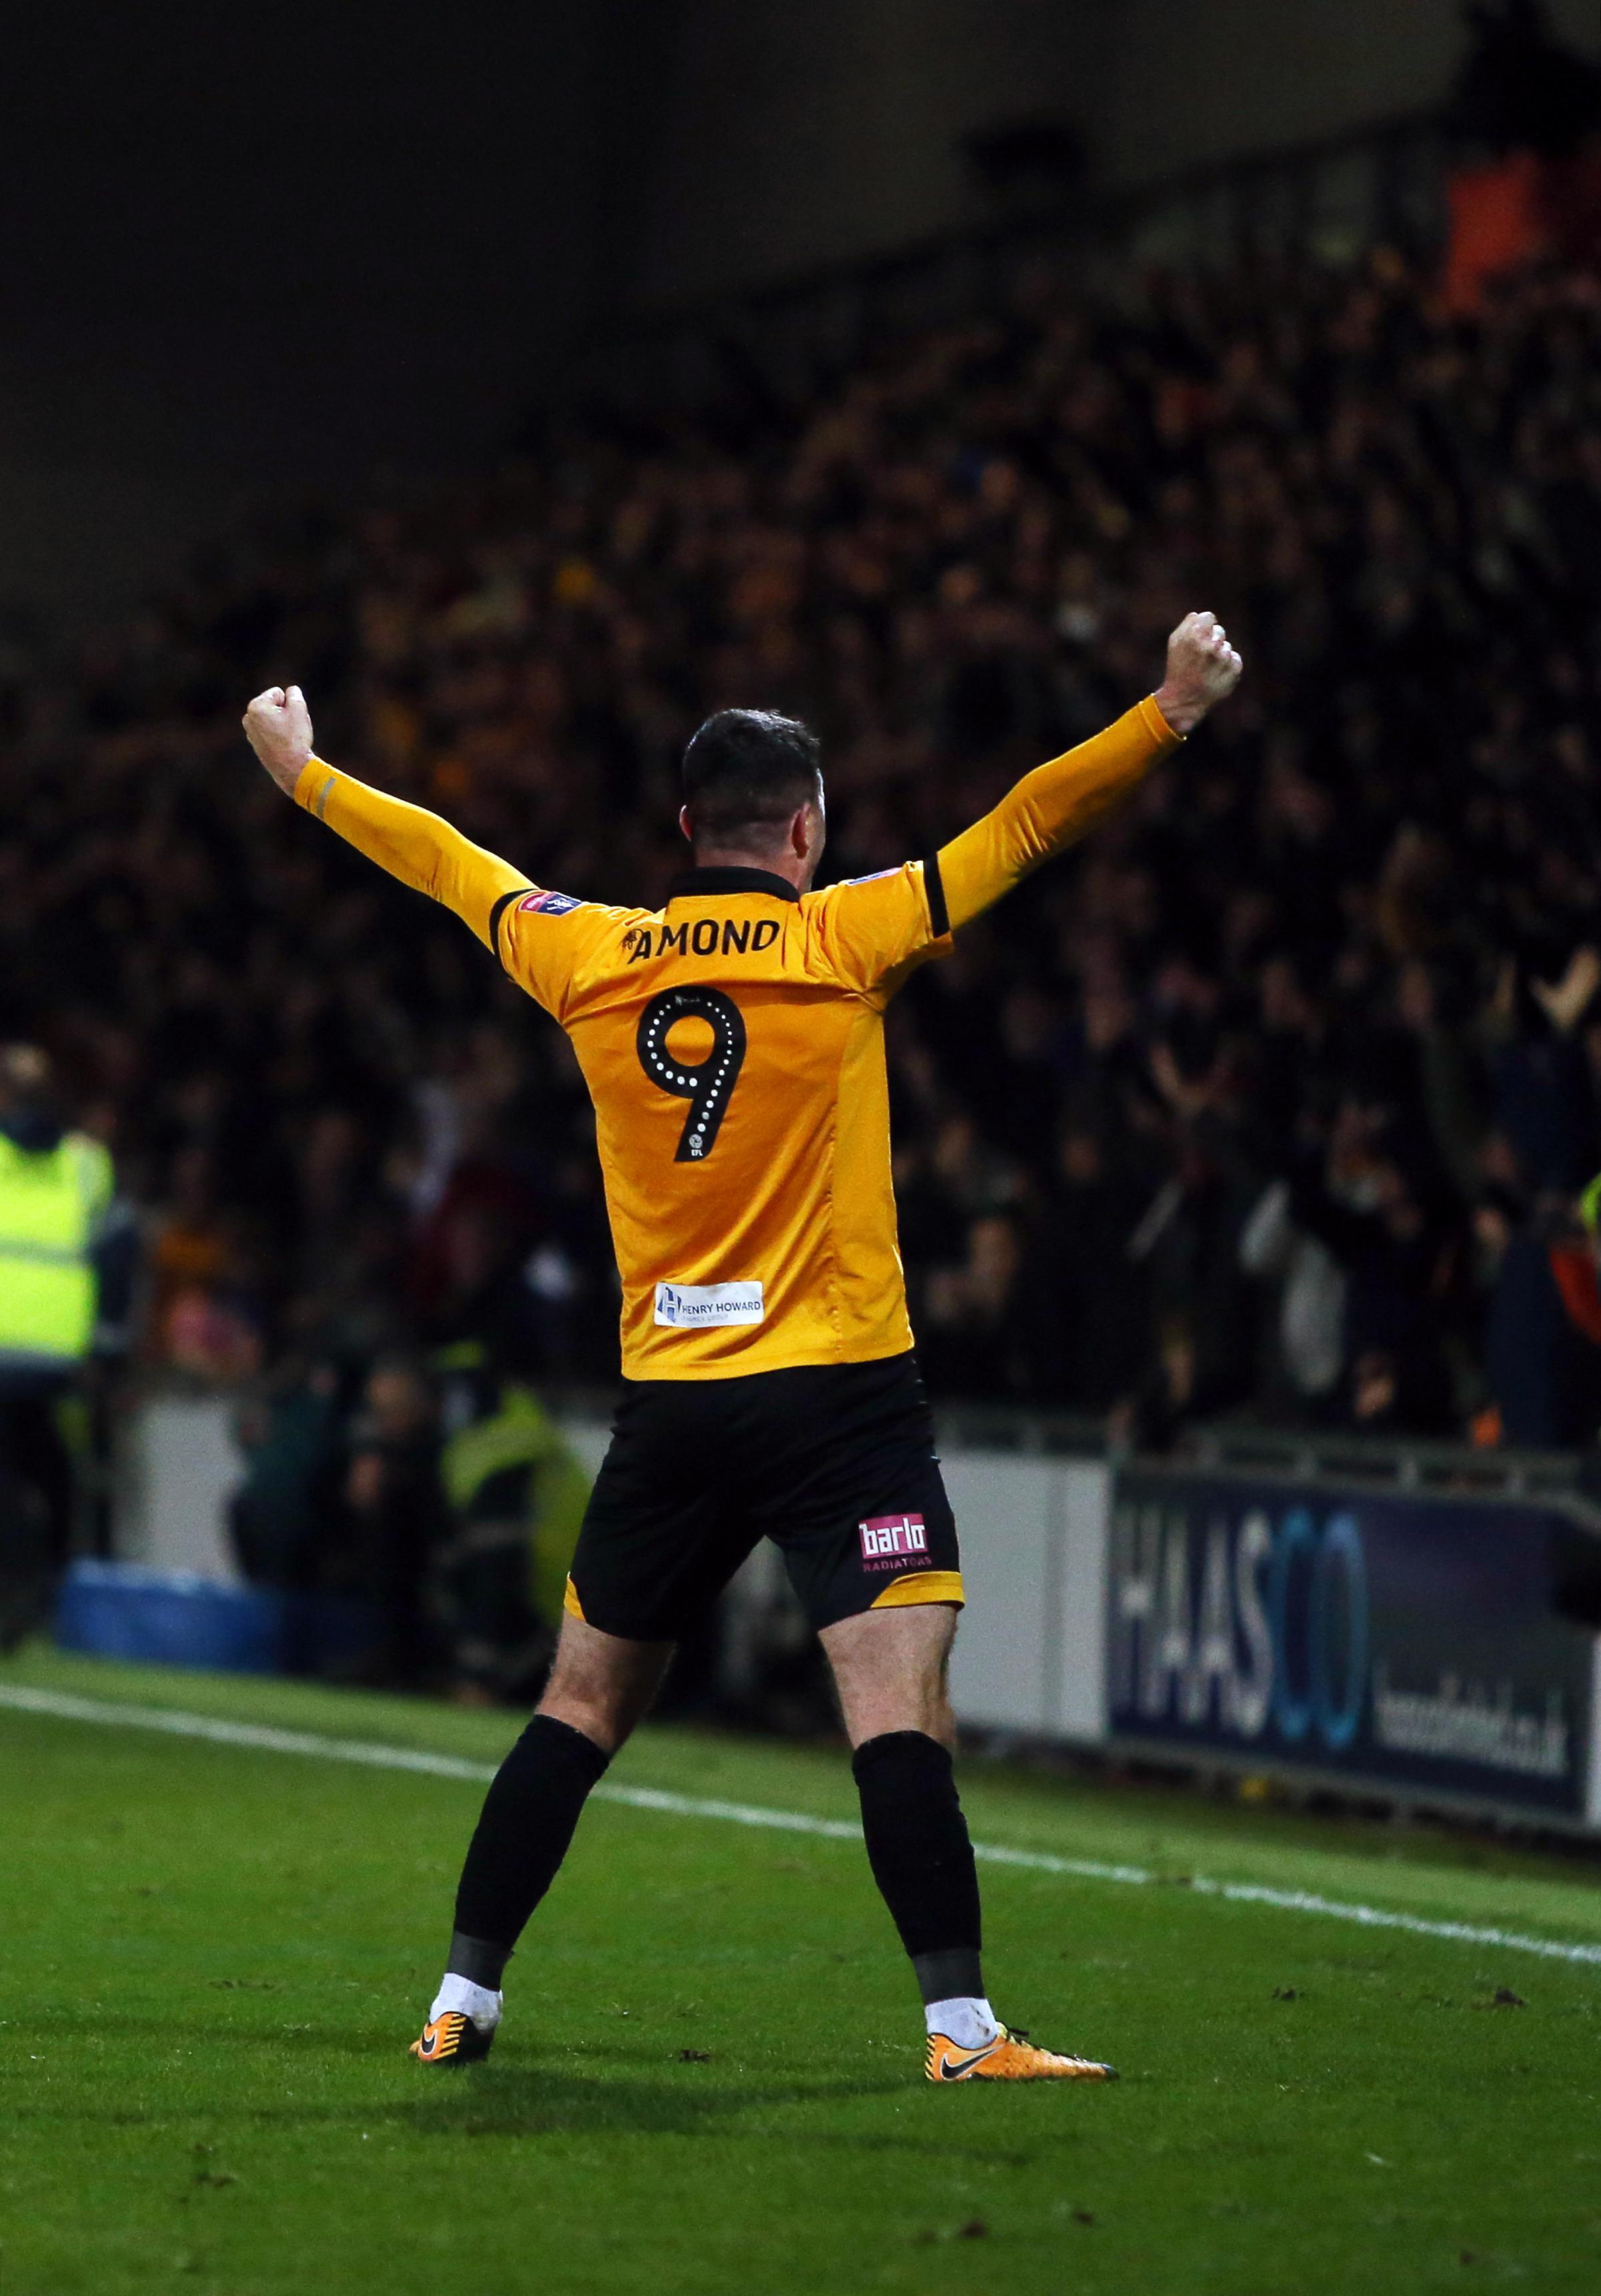 Relive An Unforgettable Day With These Incredible Images Of Newport County Afc S Fa Cup Giant Killing Of Leicester City South Wales Argus